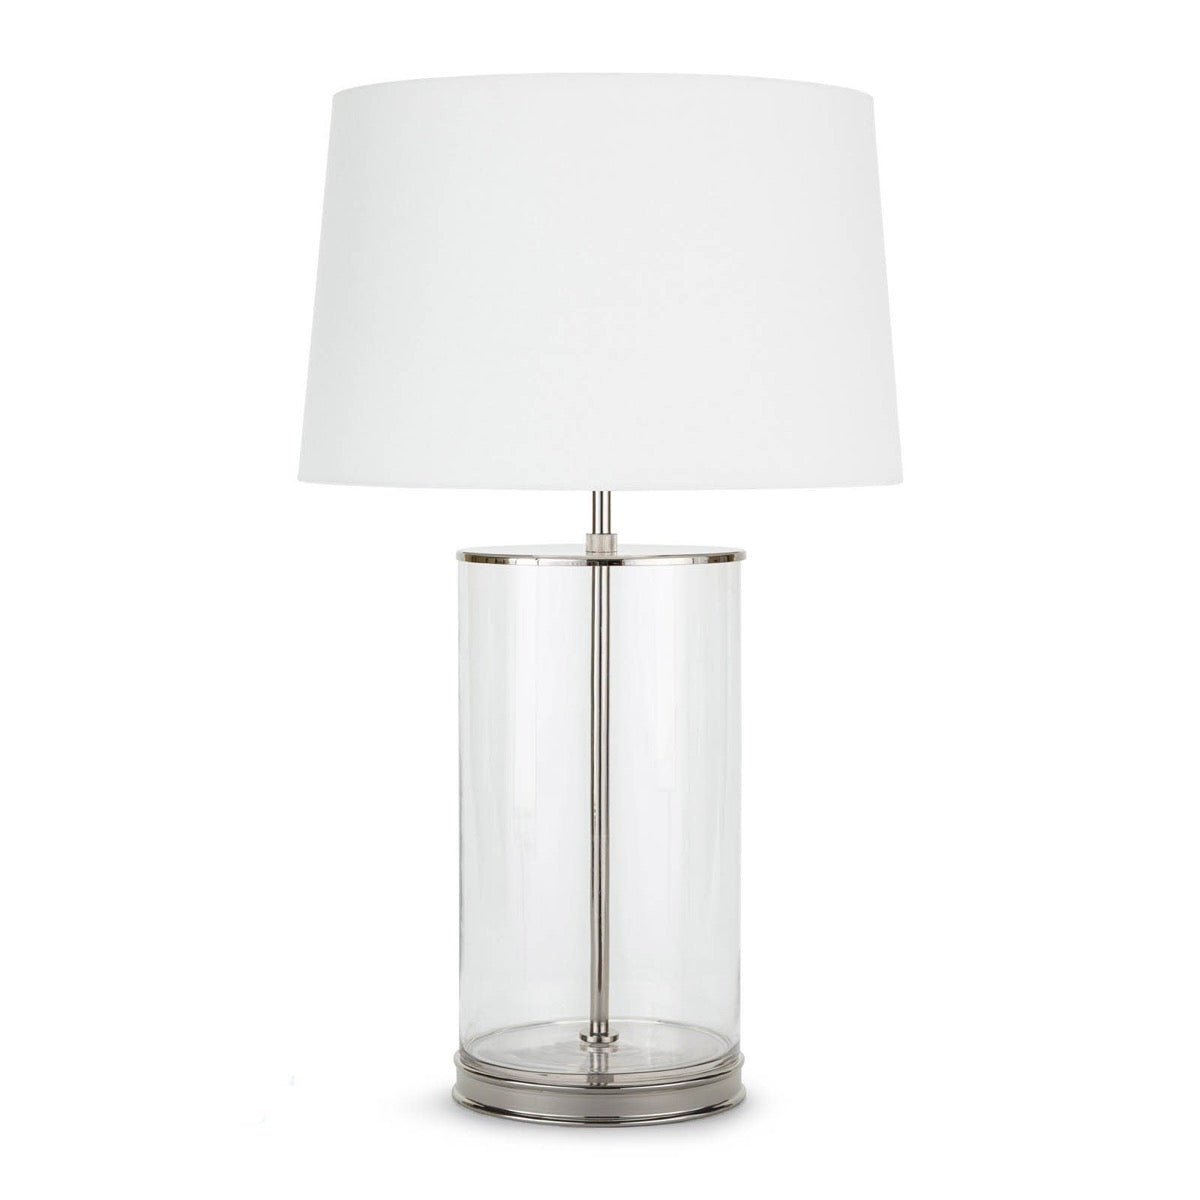 Magelian Glass Table Lamp Natural Brass. Front view. 